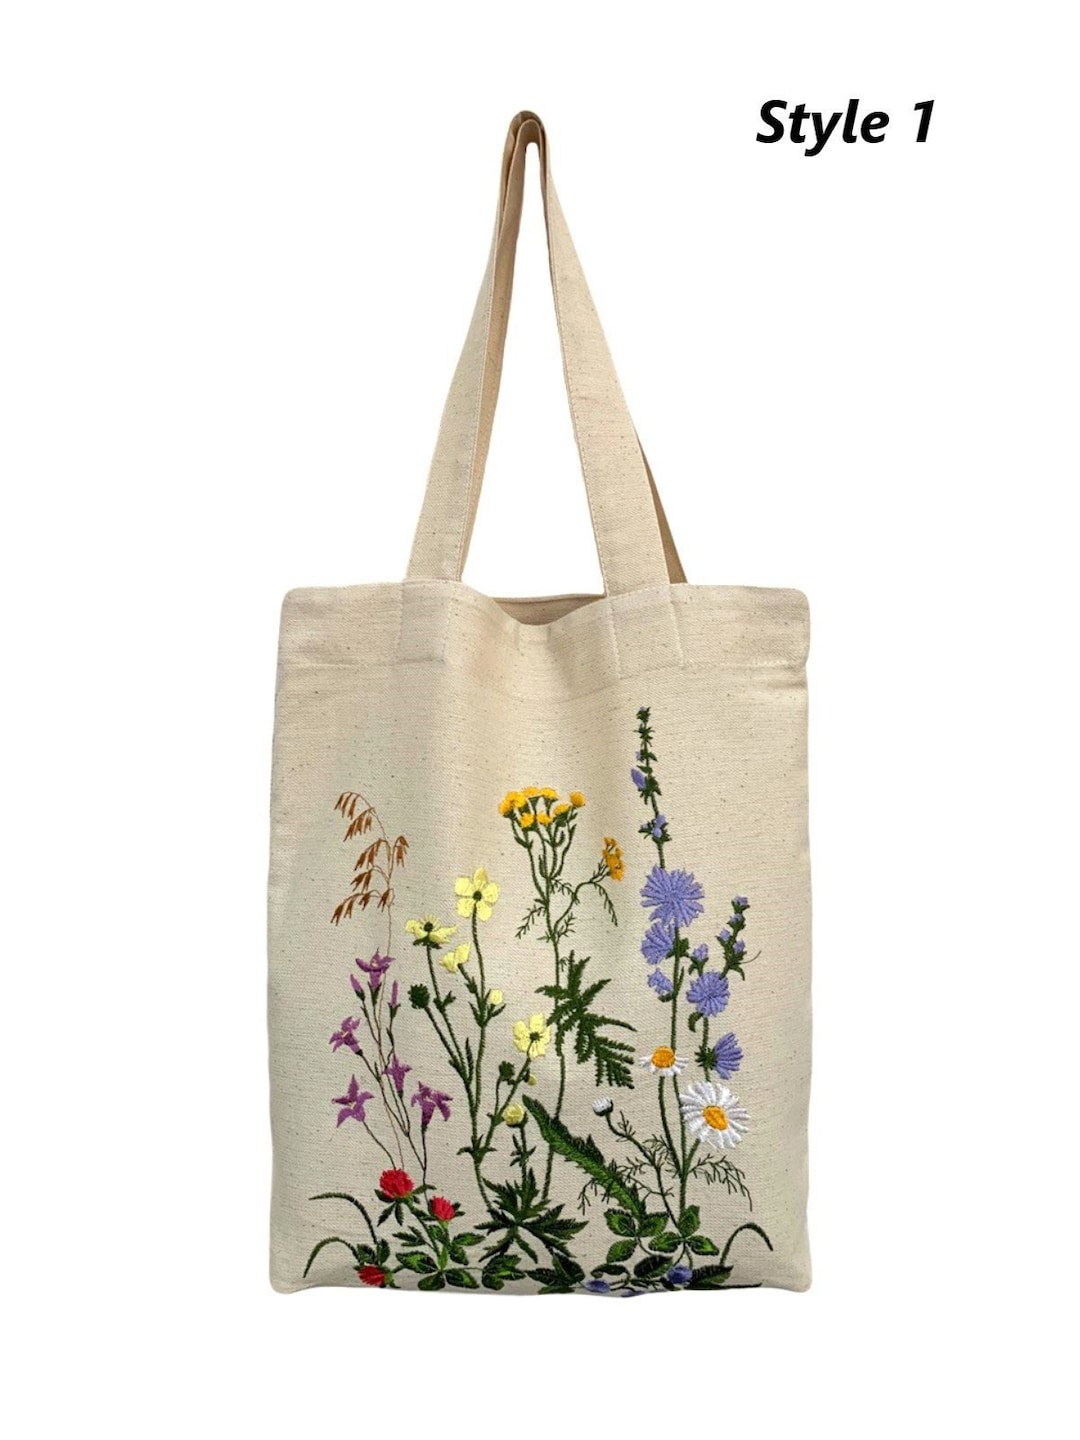 Embroidered Tote Bags, Natural Cotton, Floral Embroidery, Shopping Bag ...